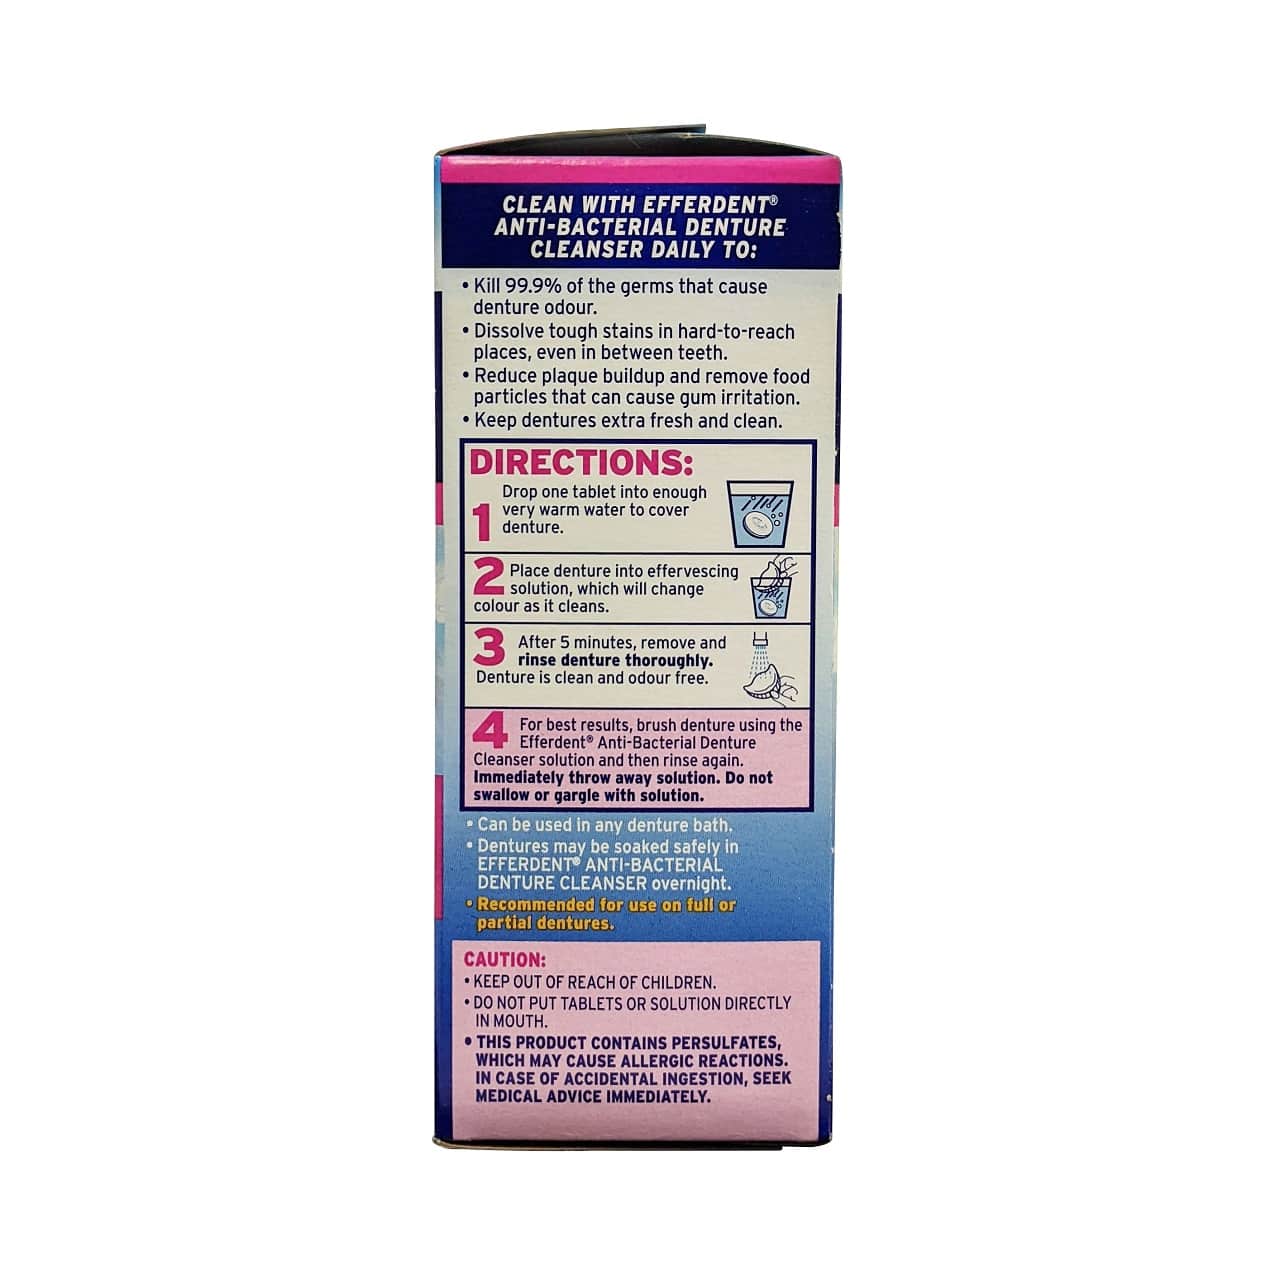 Description, directions, and caution for Efferdent Complete Clean Antibacterial Denture Cleanser (78 tablets) in English